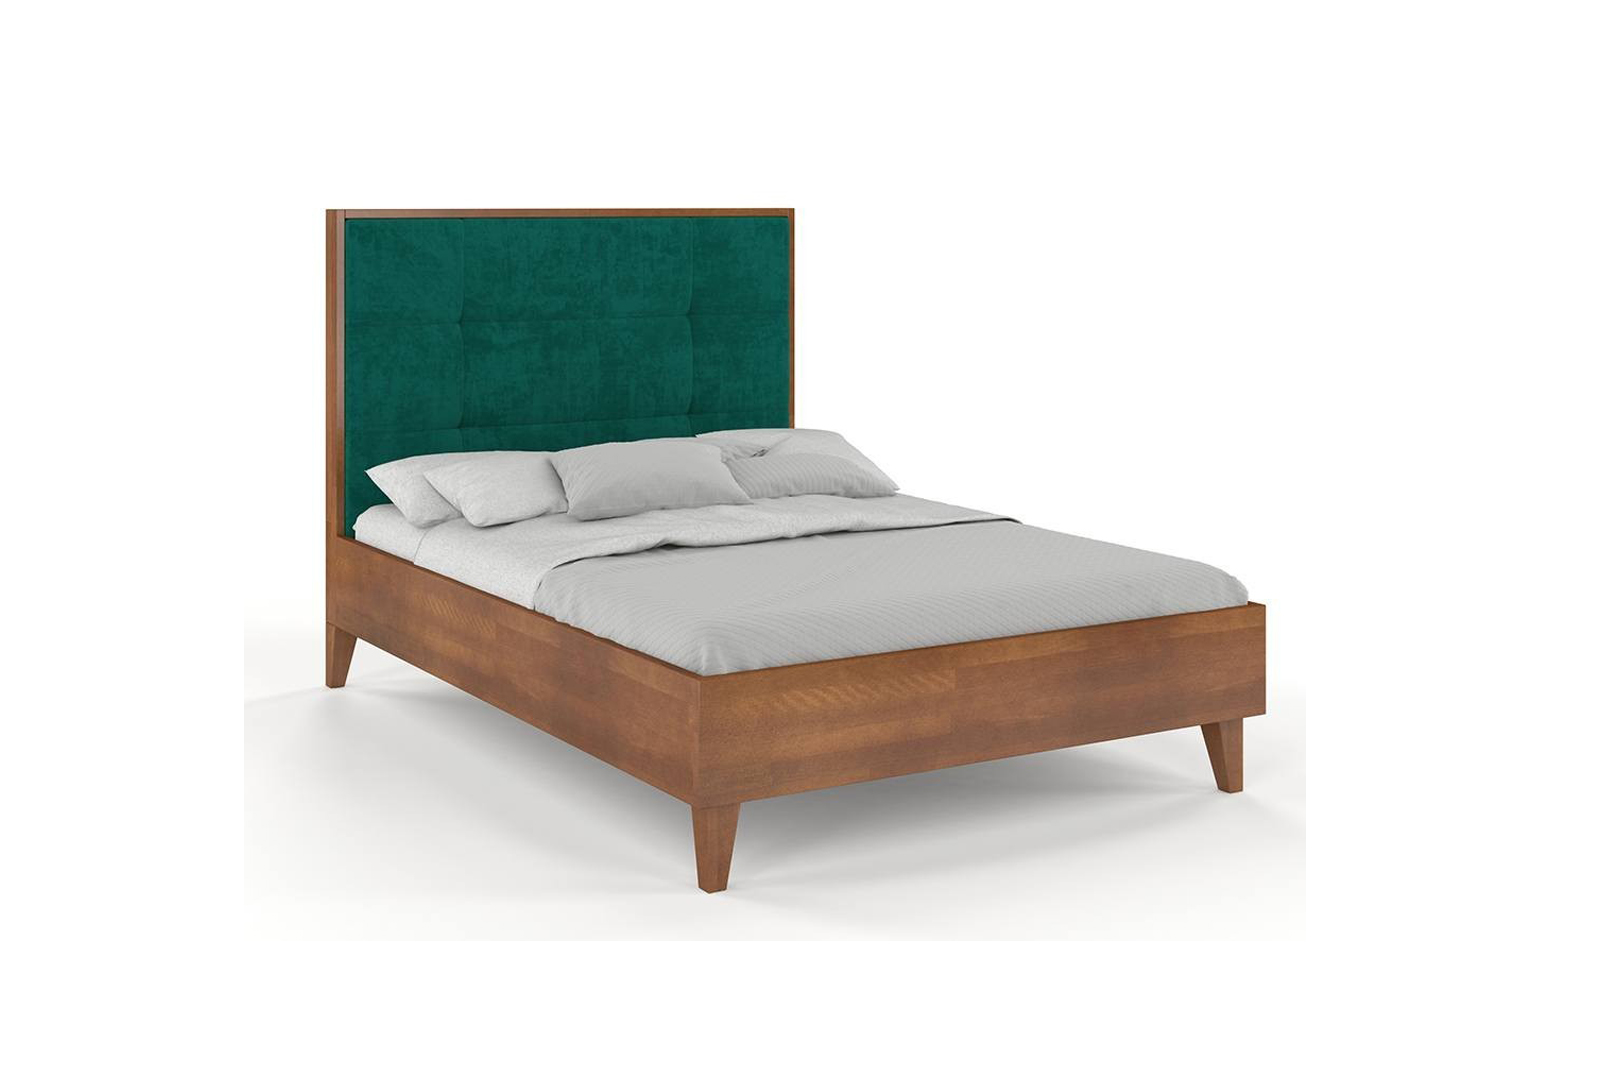 VISBY FRIDA WOODEN BEECH BED WITH A HIGH HEADBOARD 4